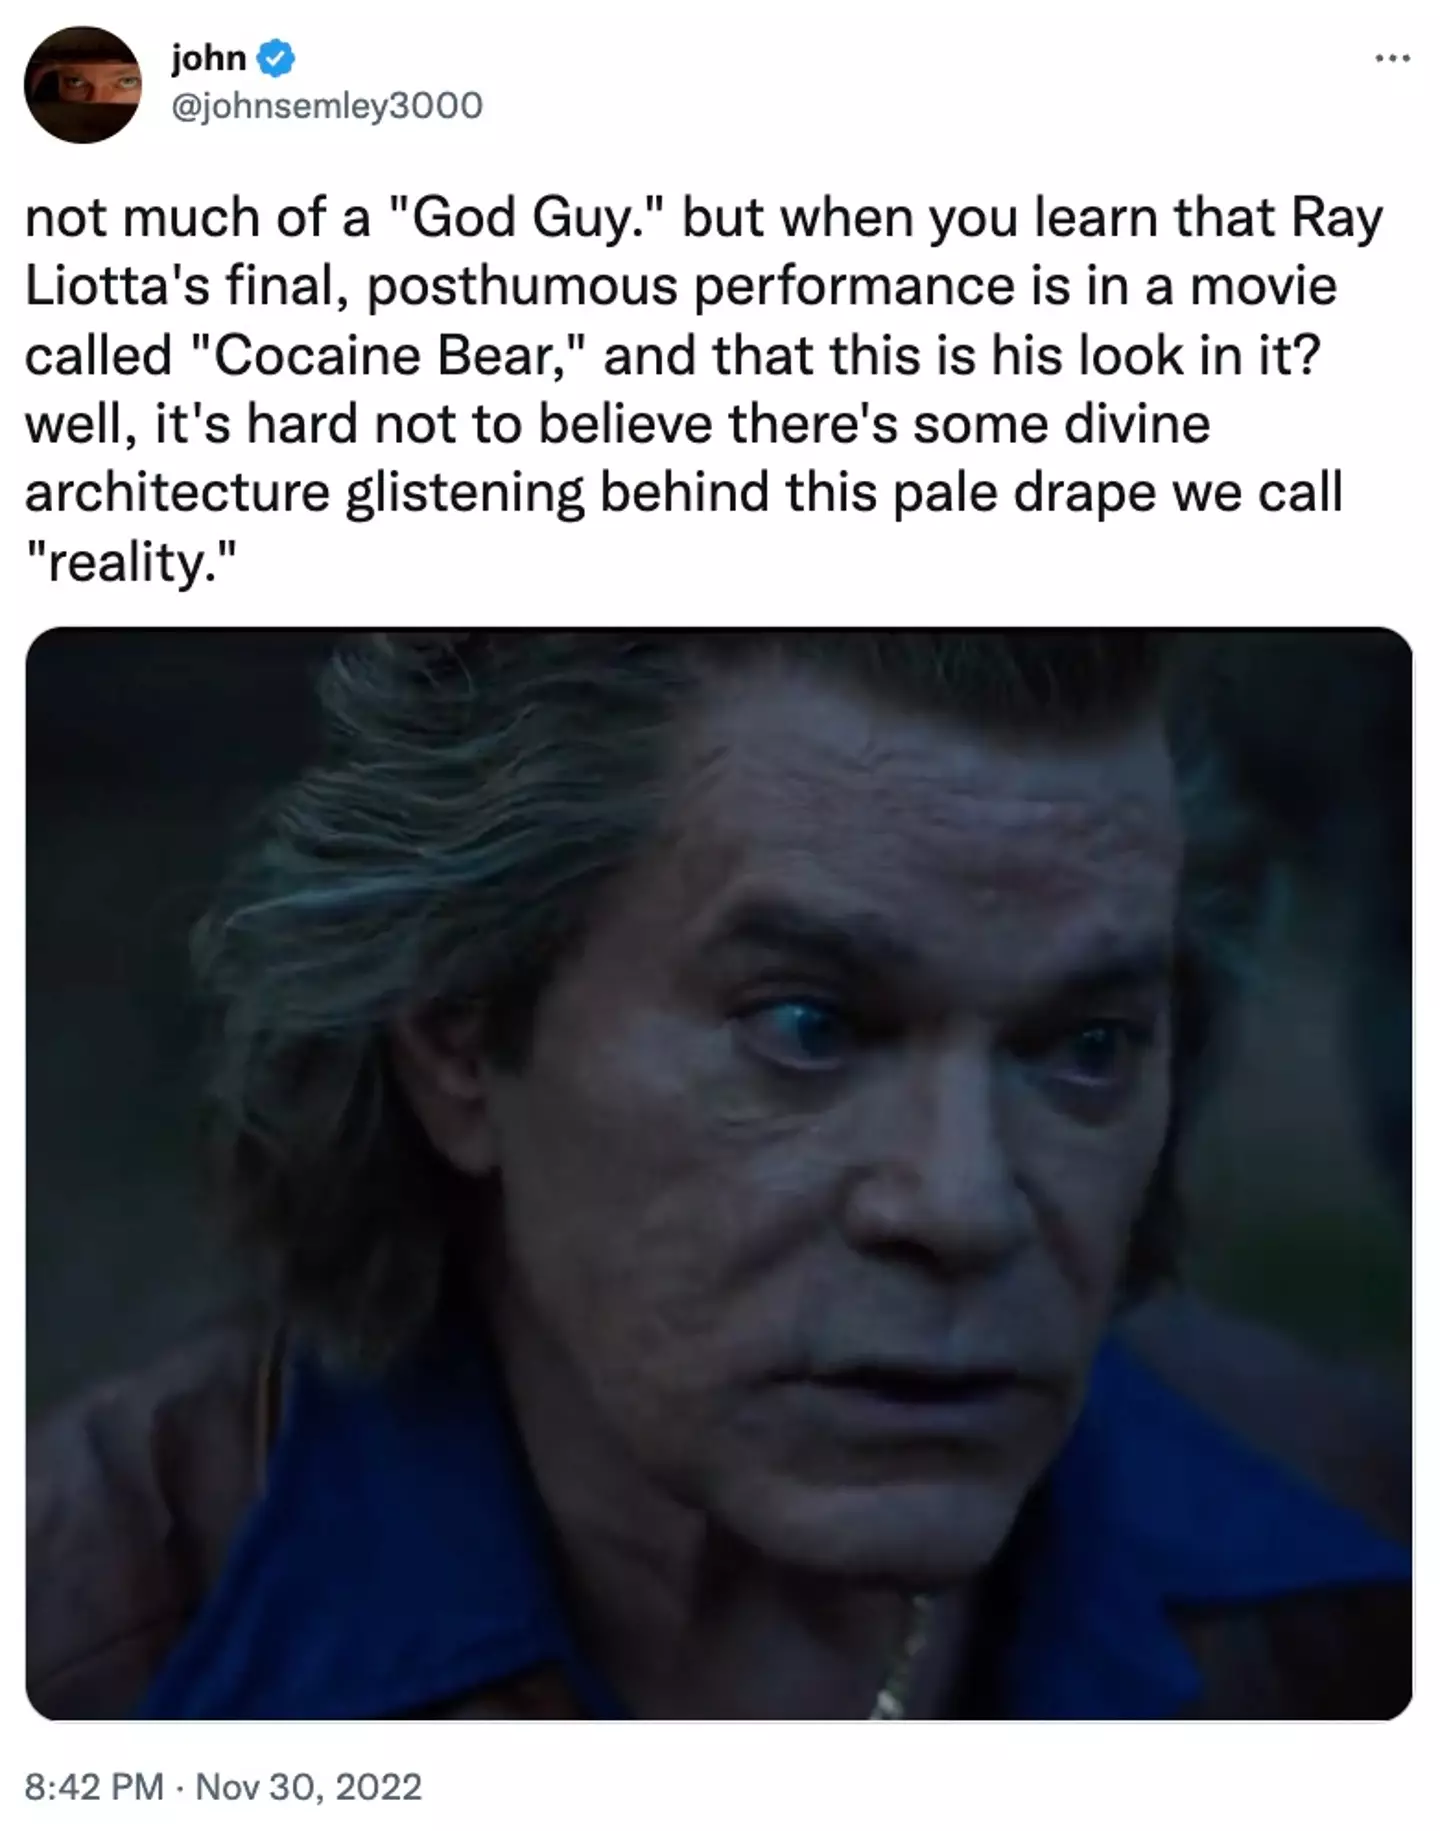 Fans are loving the fact that this is one of Ray Liotta's final performances.